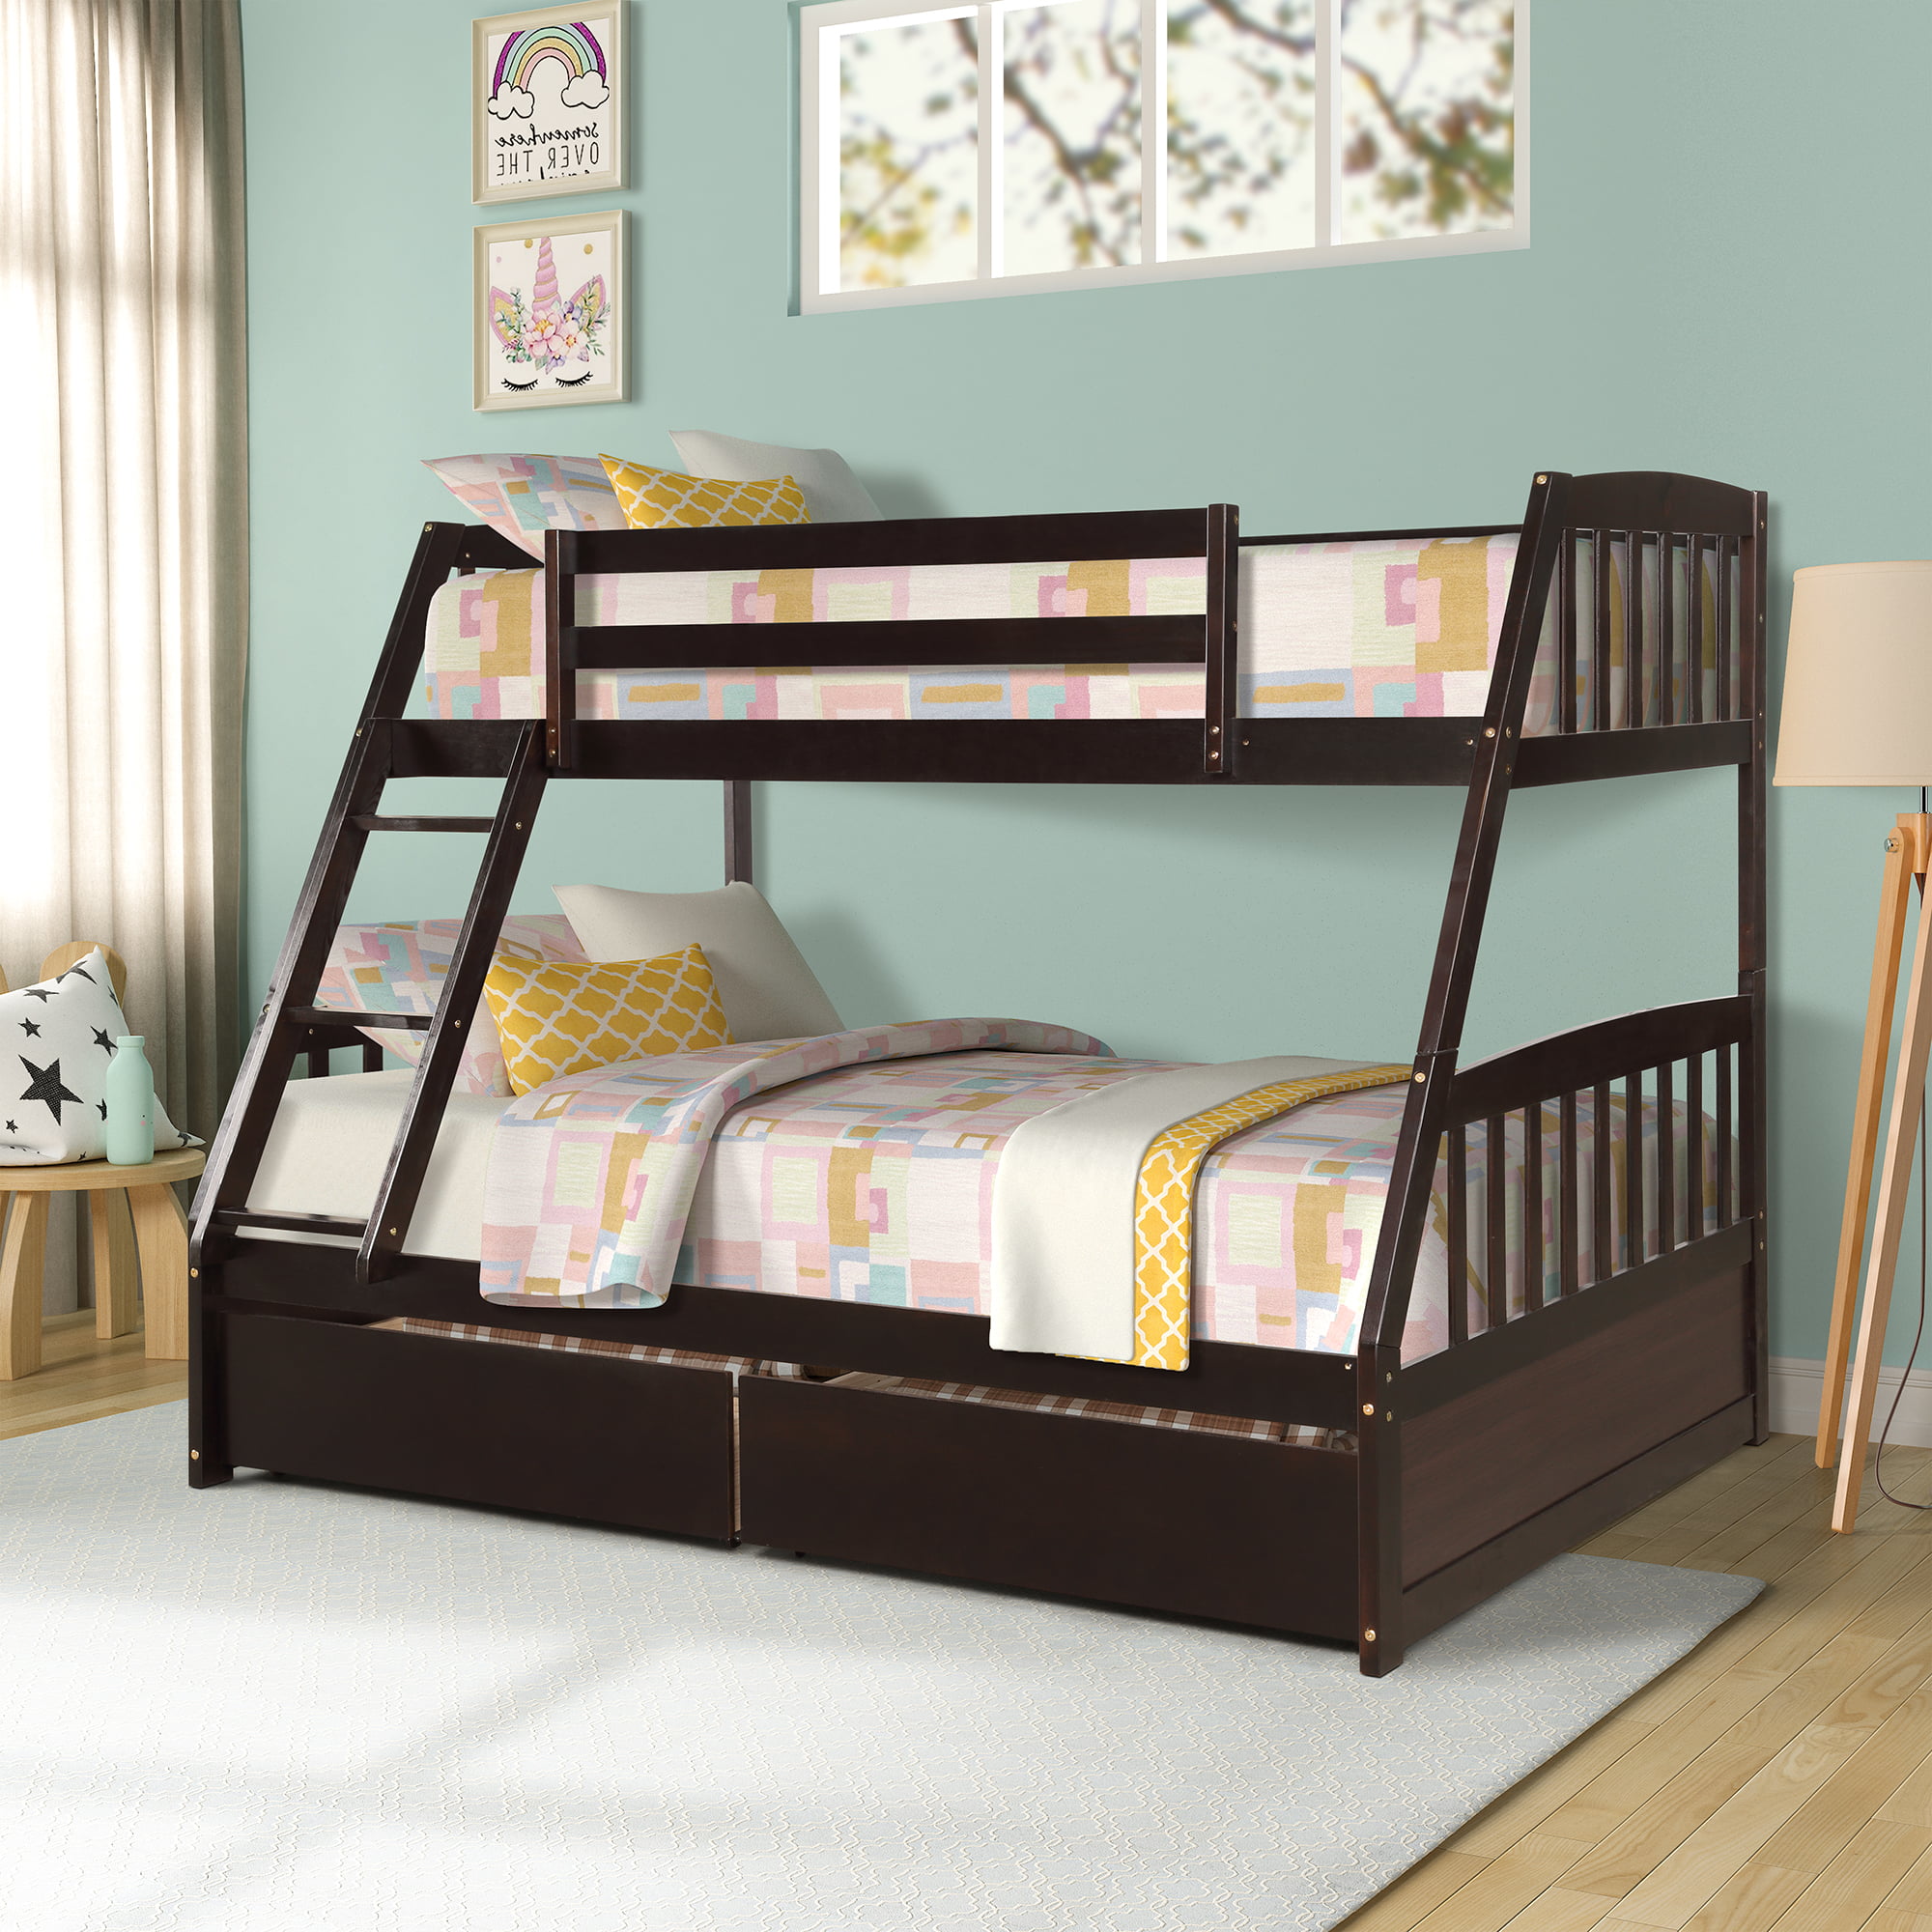 Headboard Twin Over Full Bunk Bed, Twin Over Full Bunk Bed Plans With Drawers